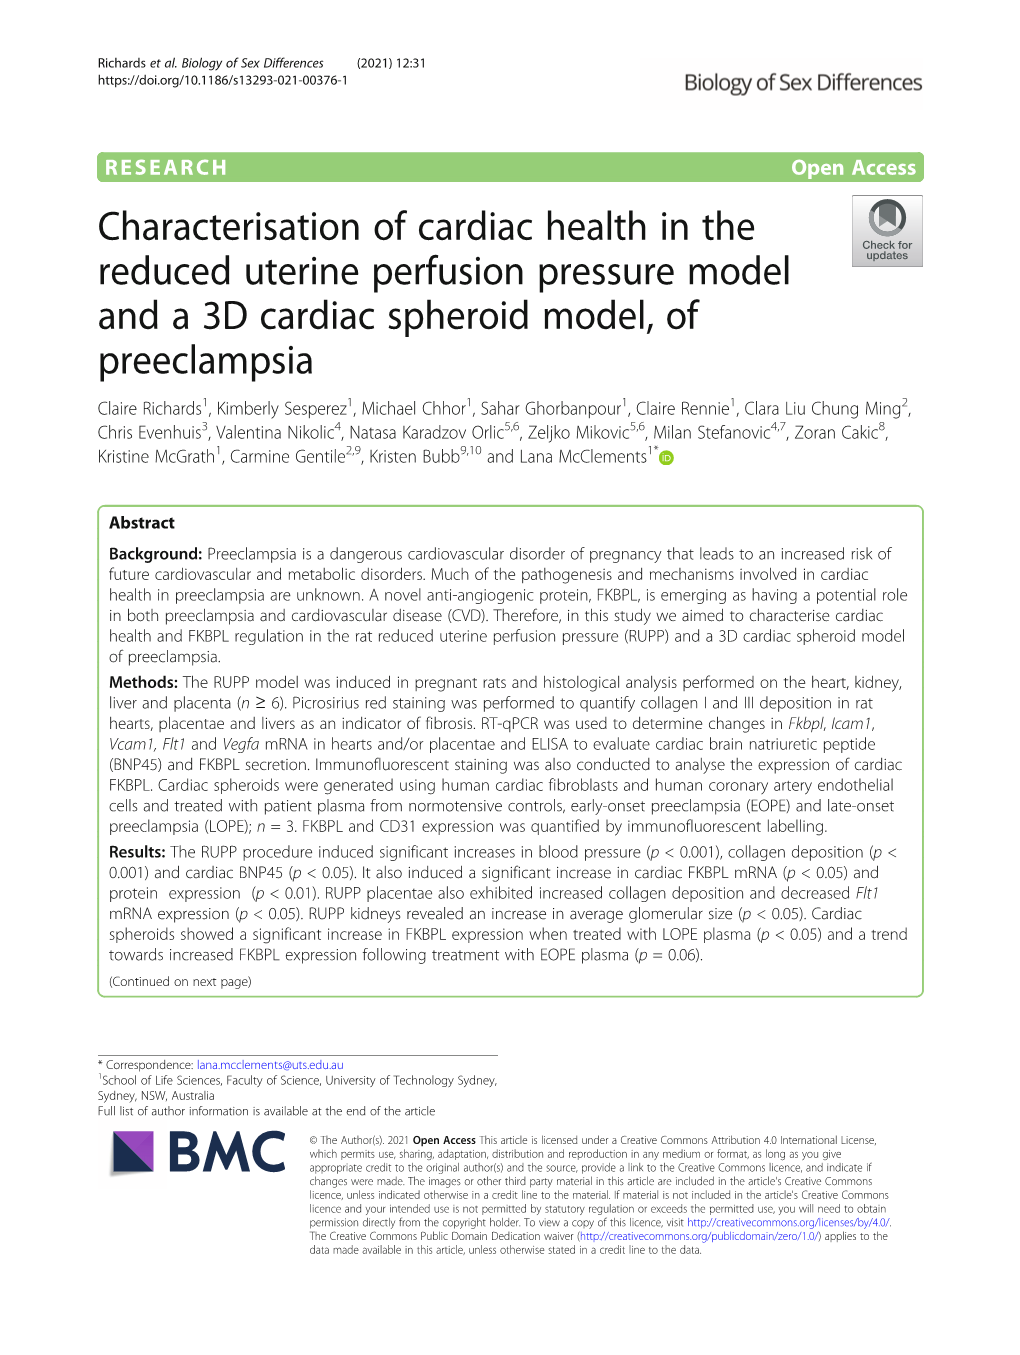 Characterisation of Cardiac Health in the Reduced Uterine Perfusion